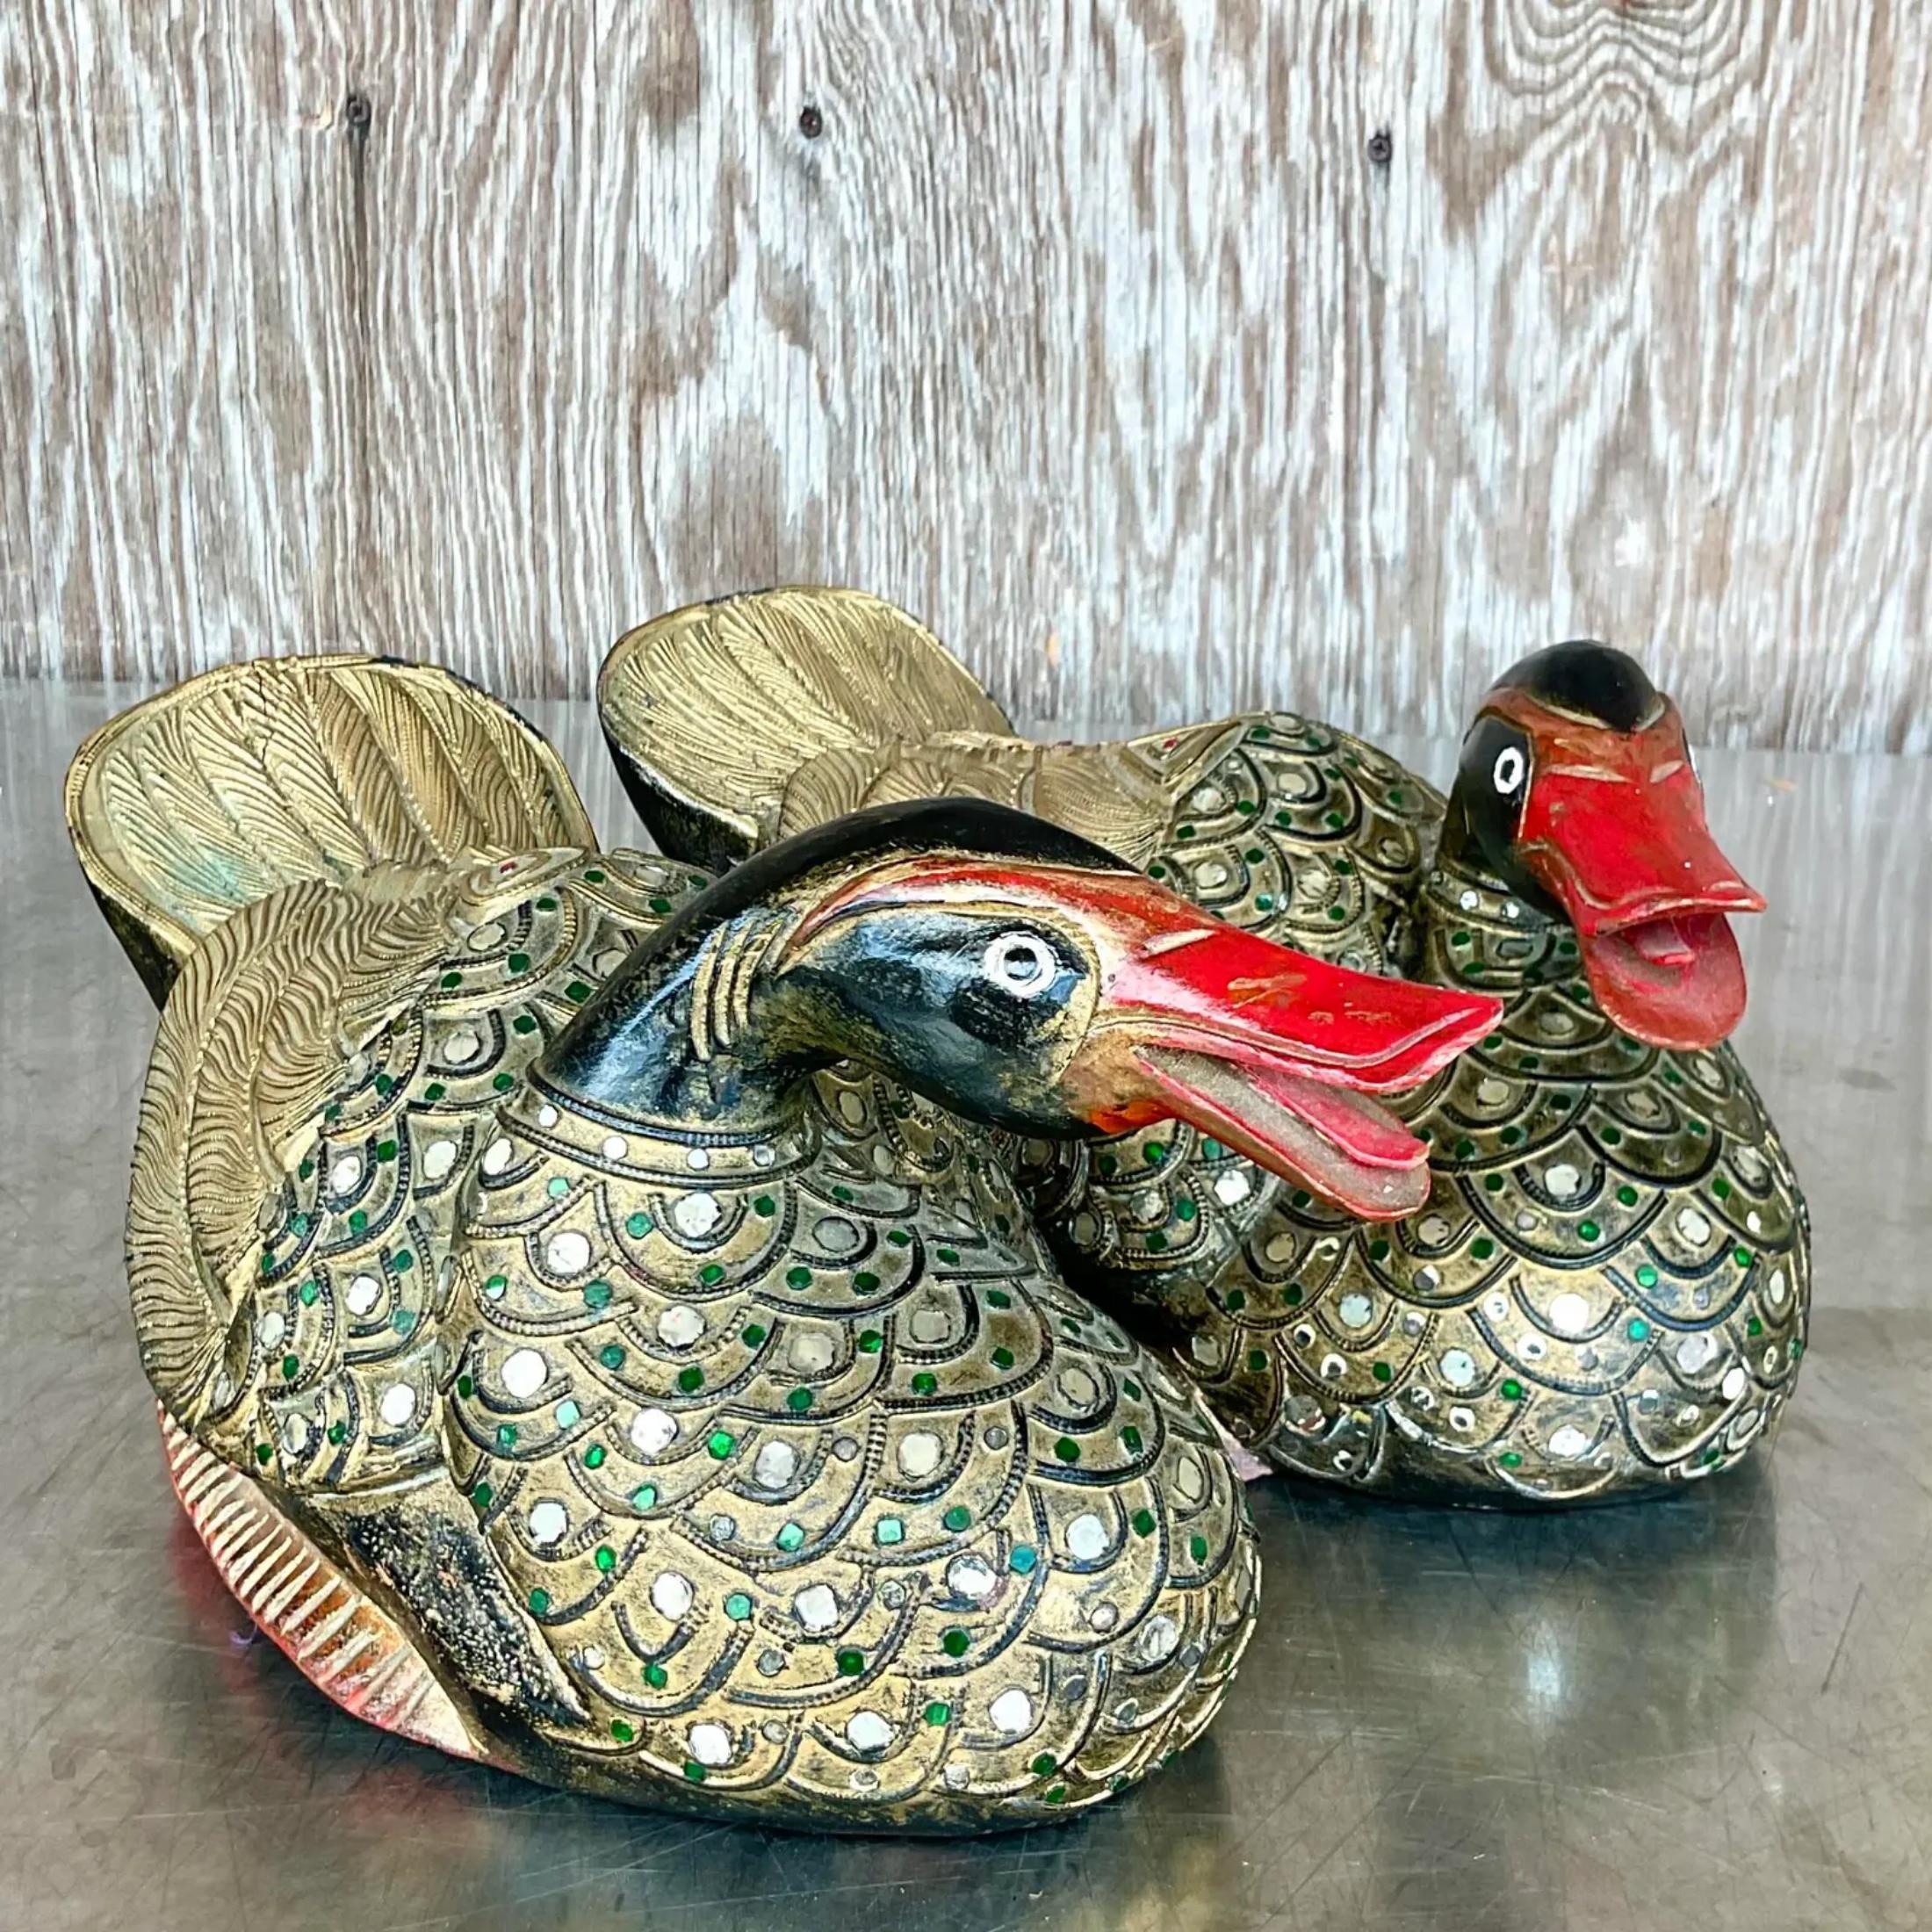 20th Century Vintage Boho Carved Wooden Ducks - a Pair For Sale